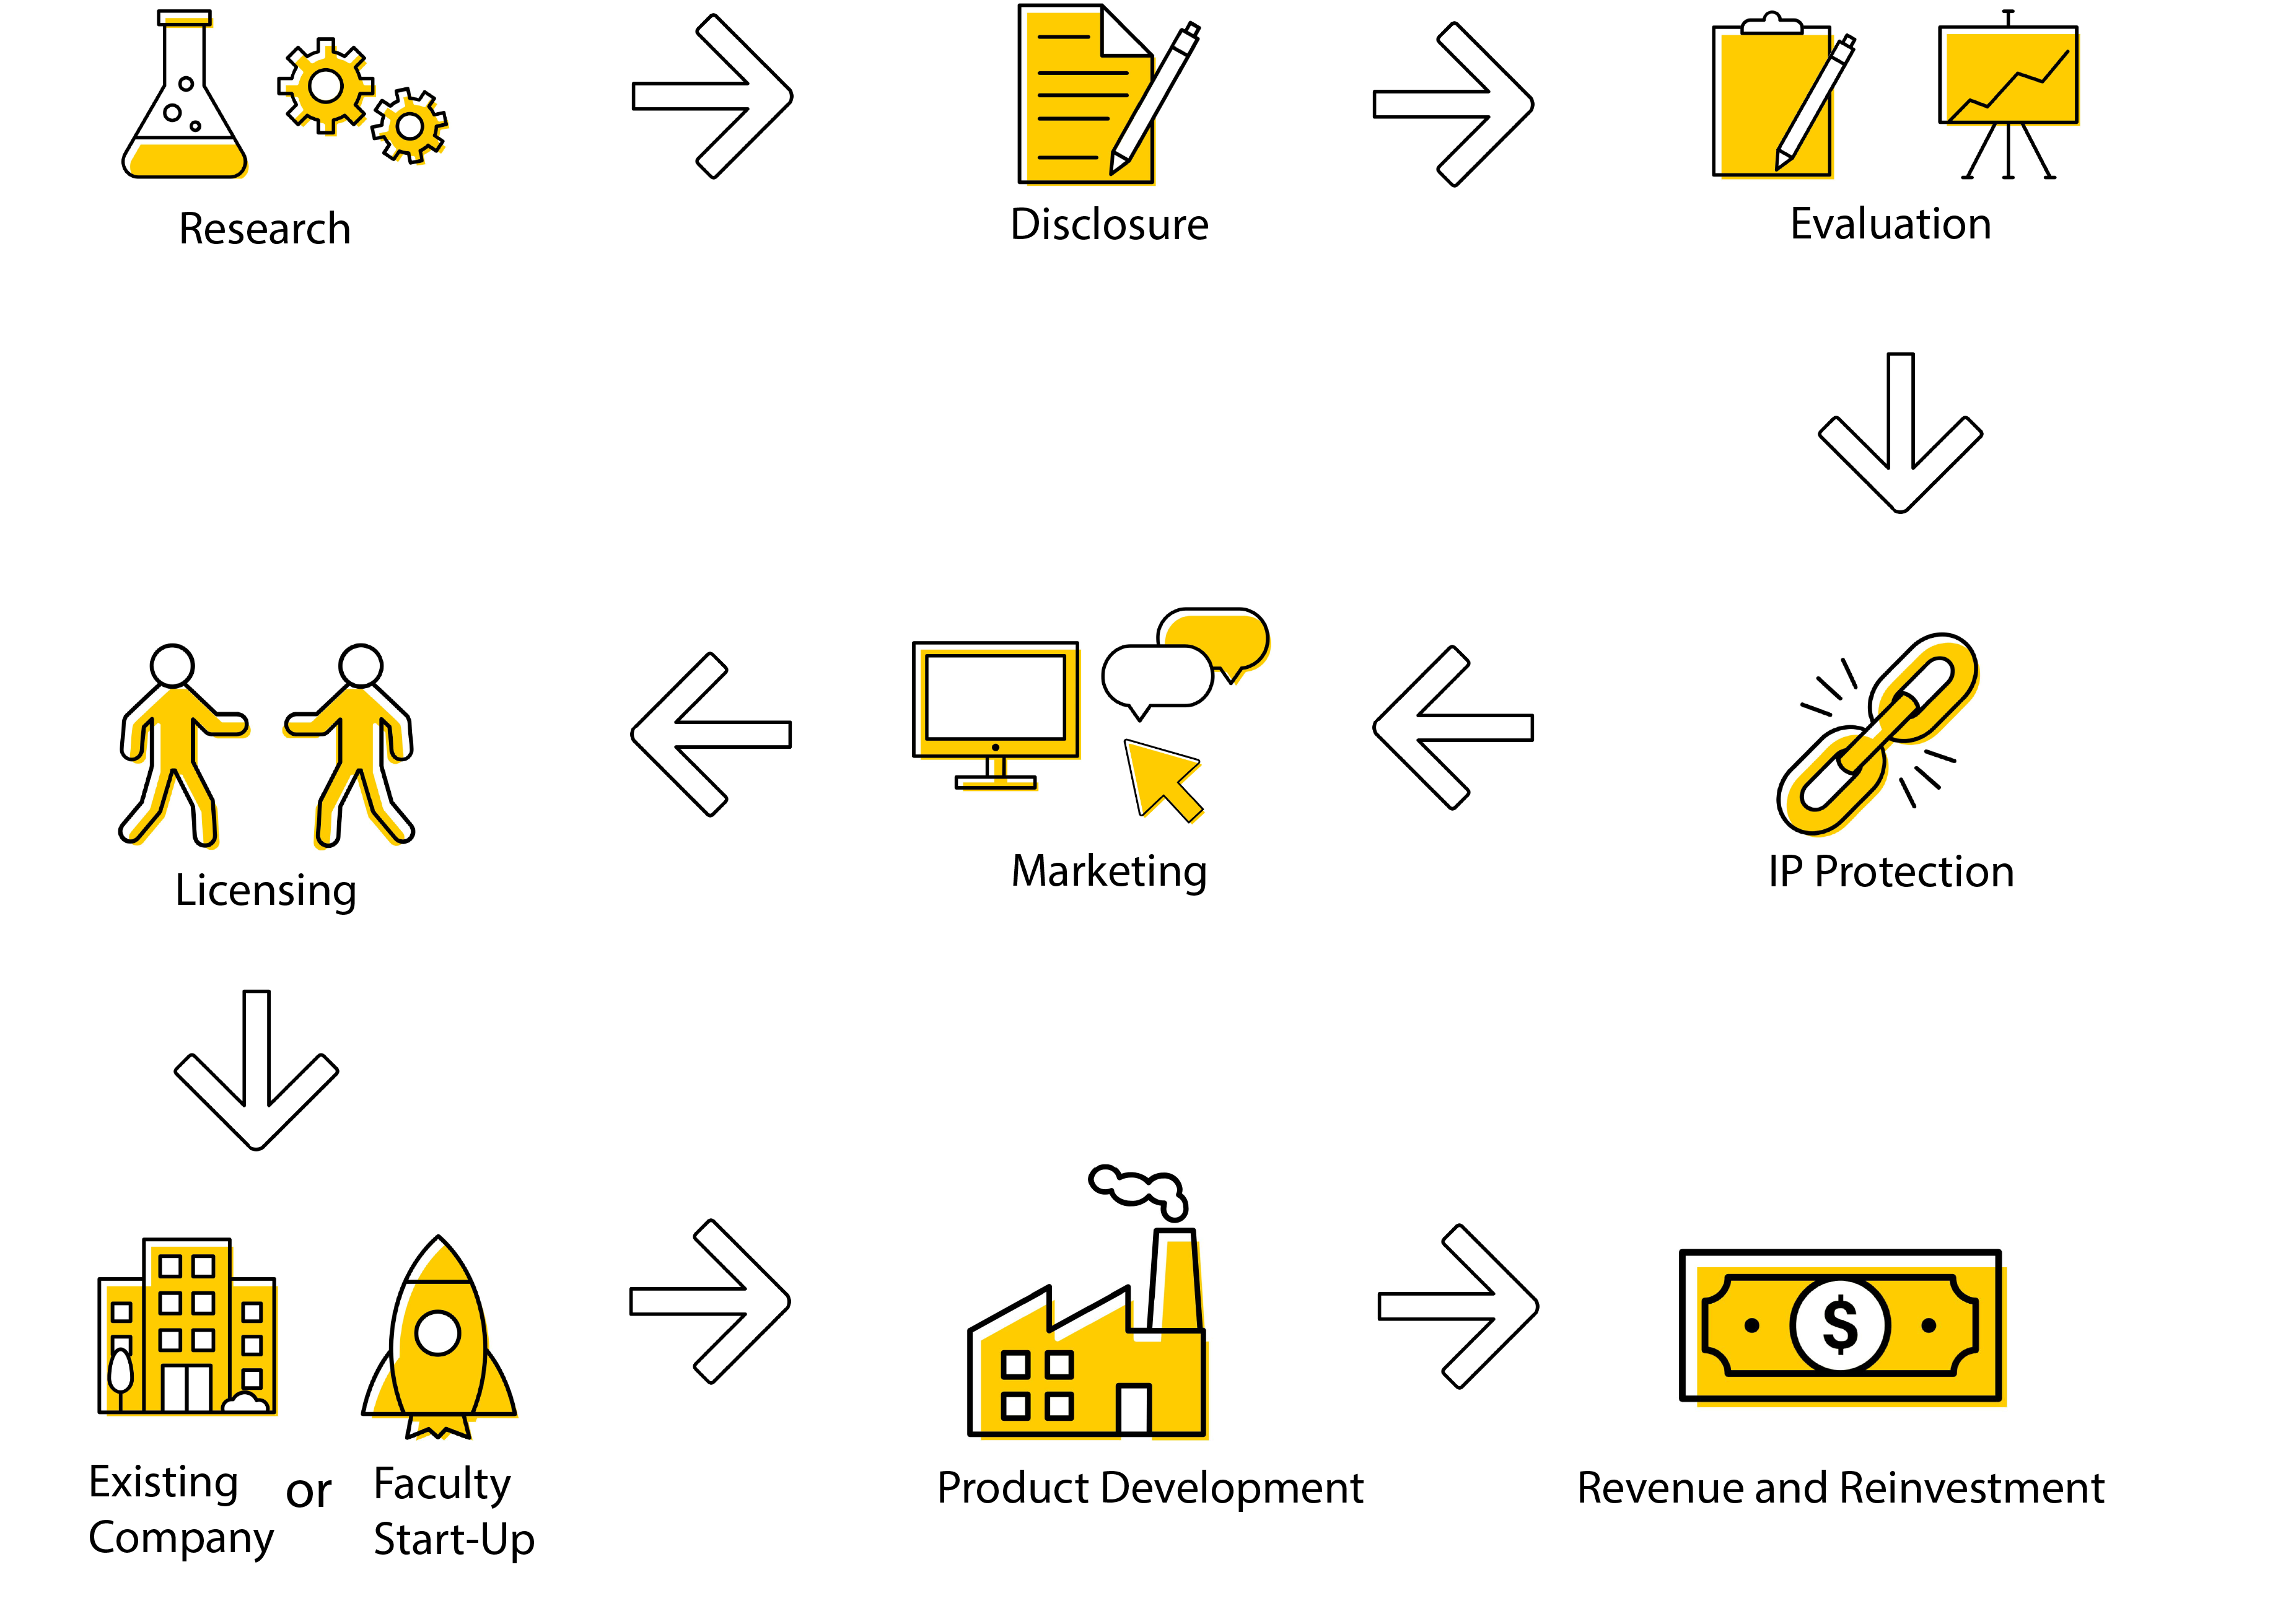 UIRF's commercialization process, small image for each step of the process with arrows in between. Detailed text for each step can be found below on this page.